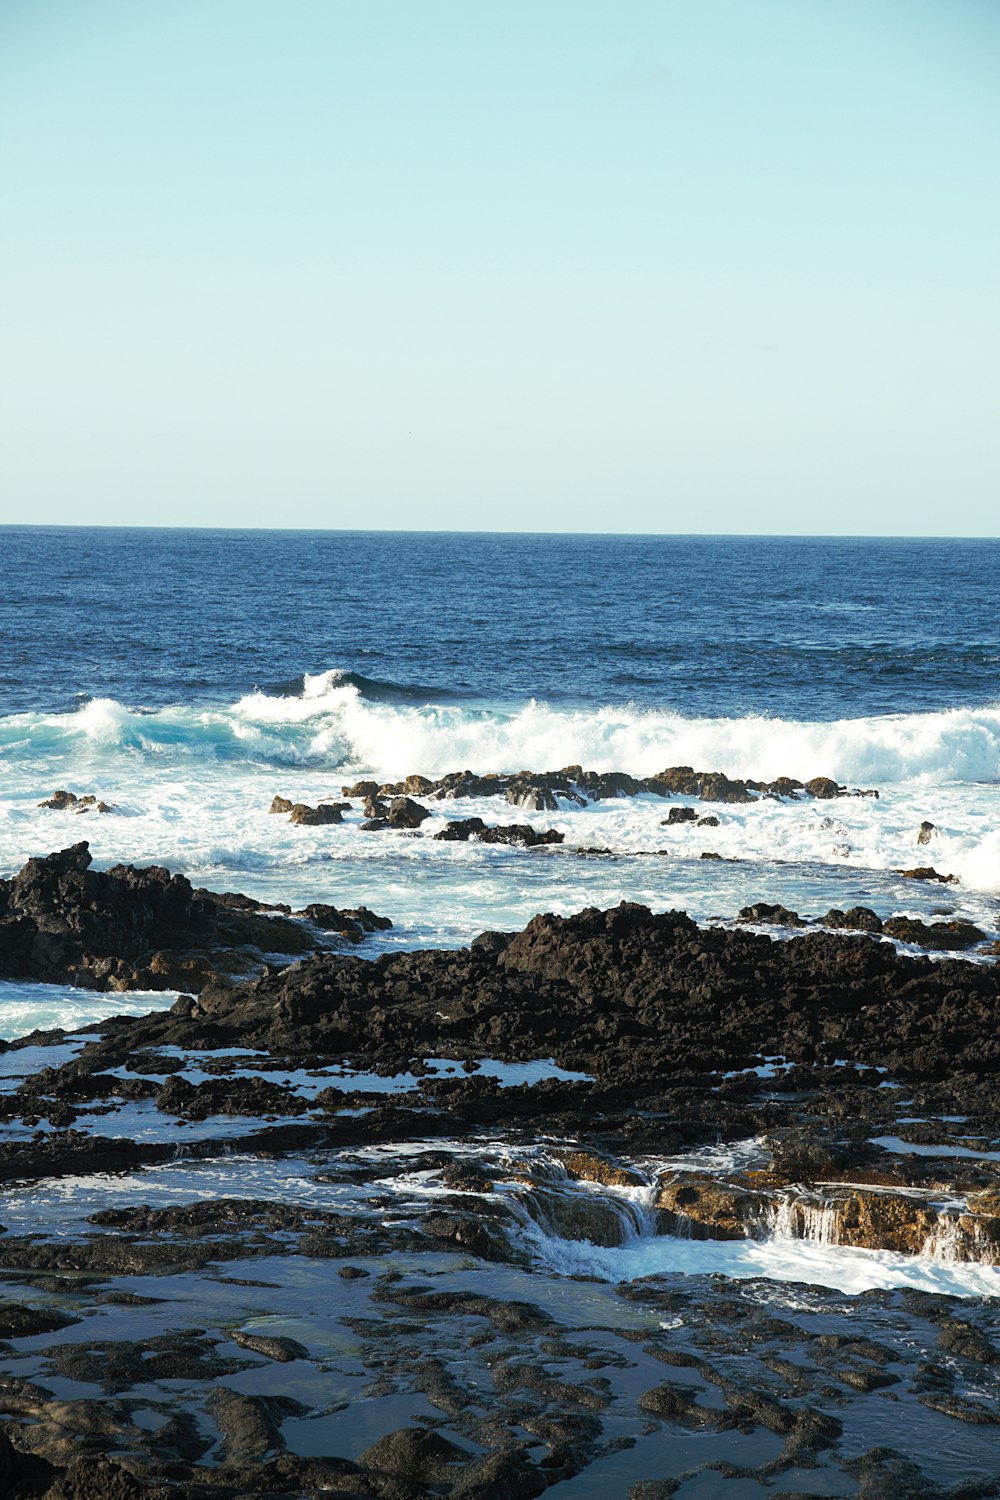 brown rocky shore with ocean waves crashing on shore during daytime